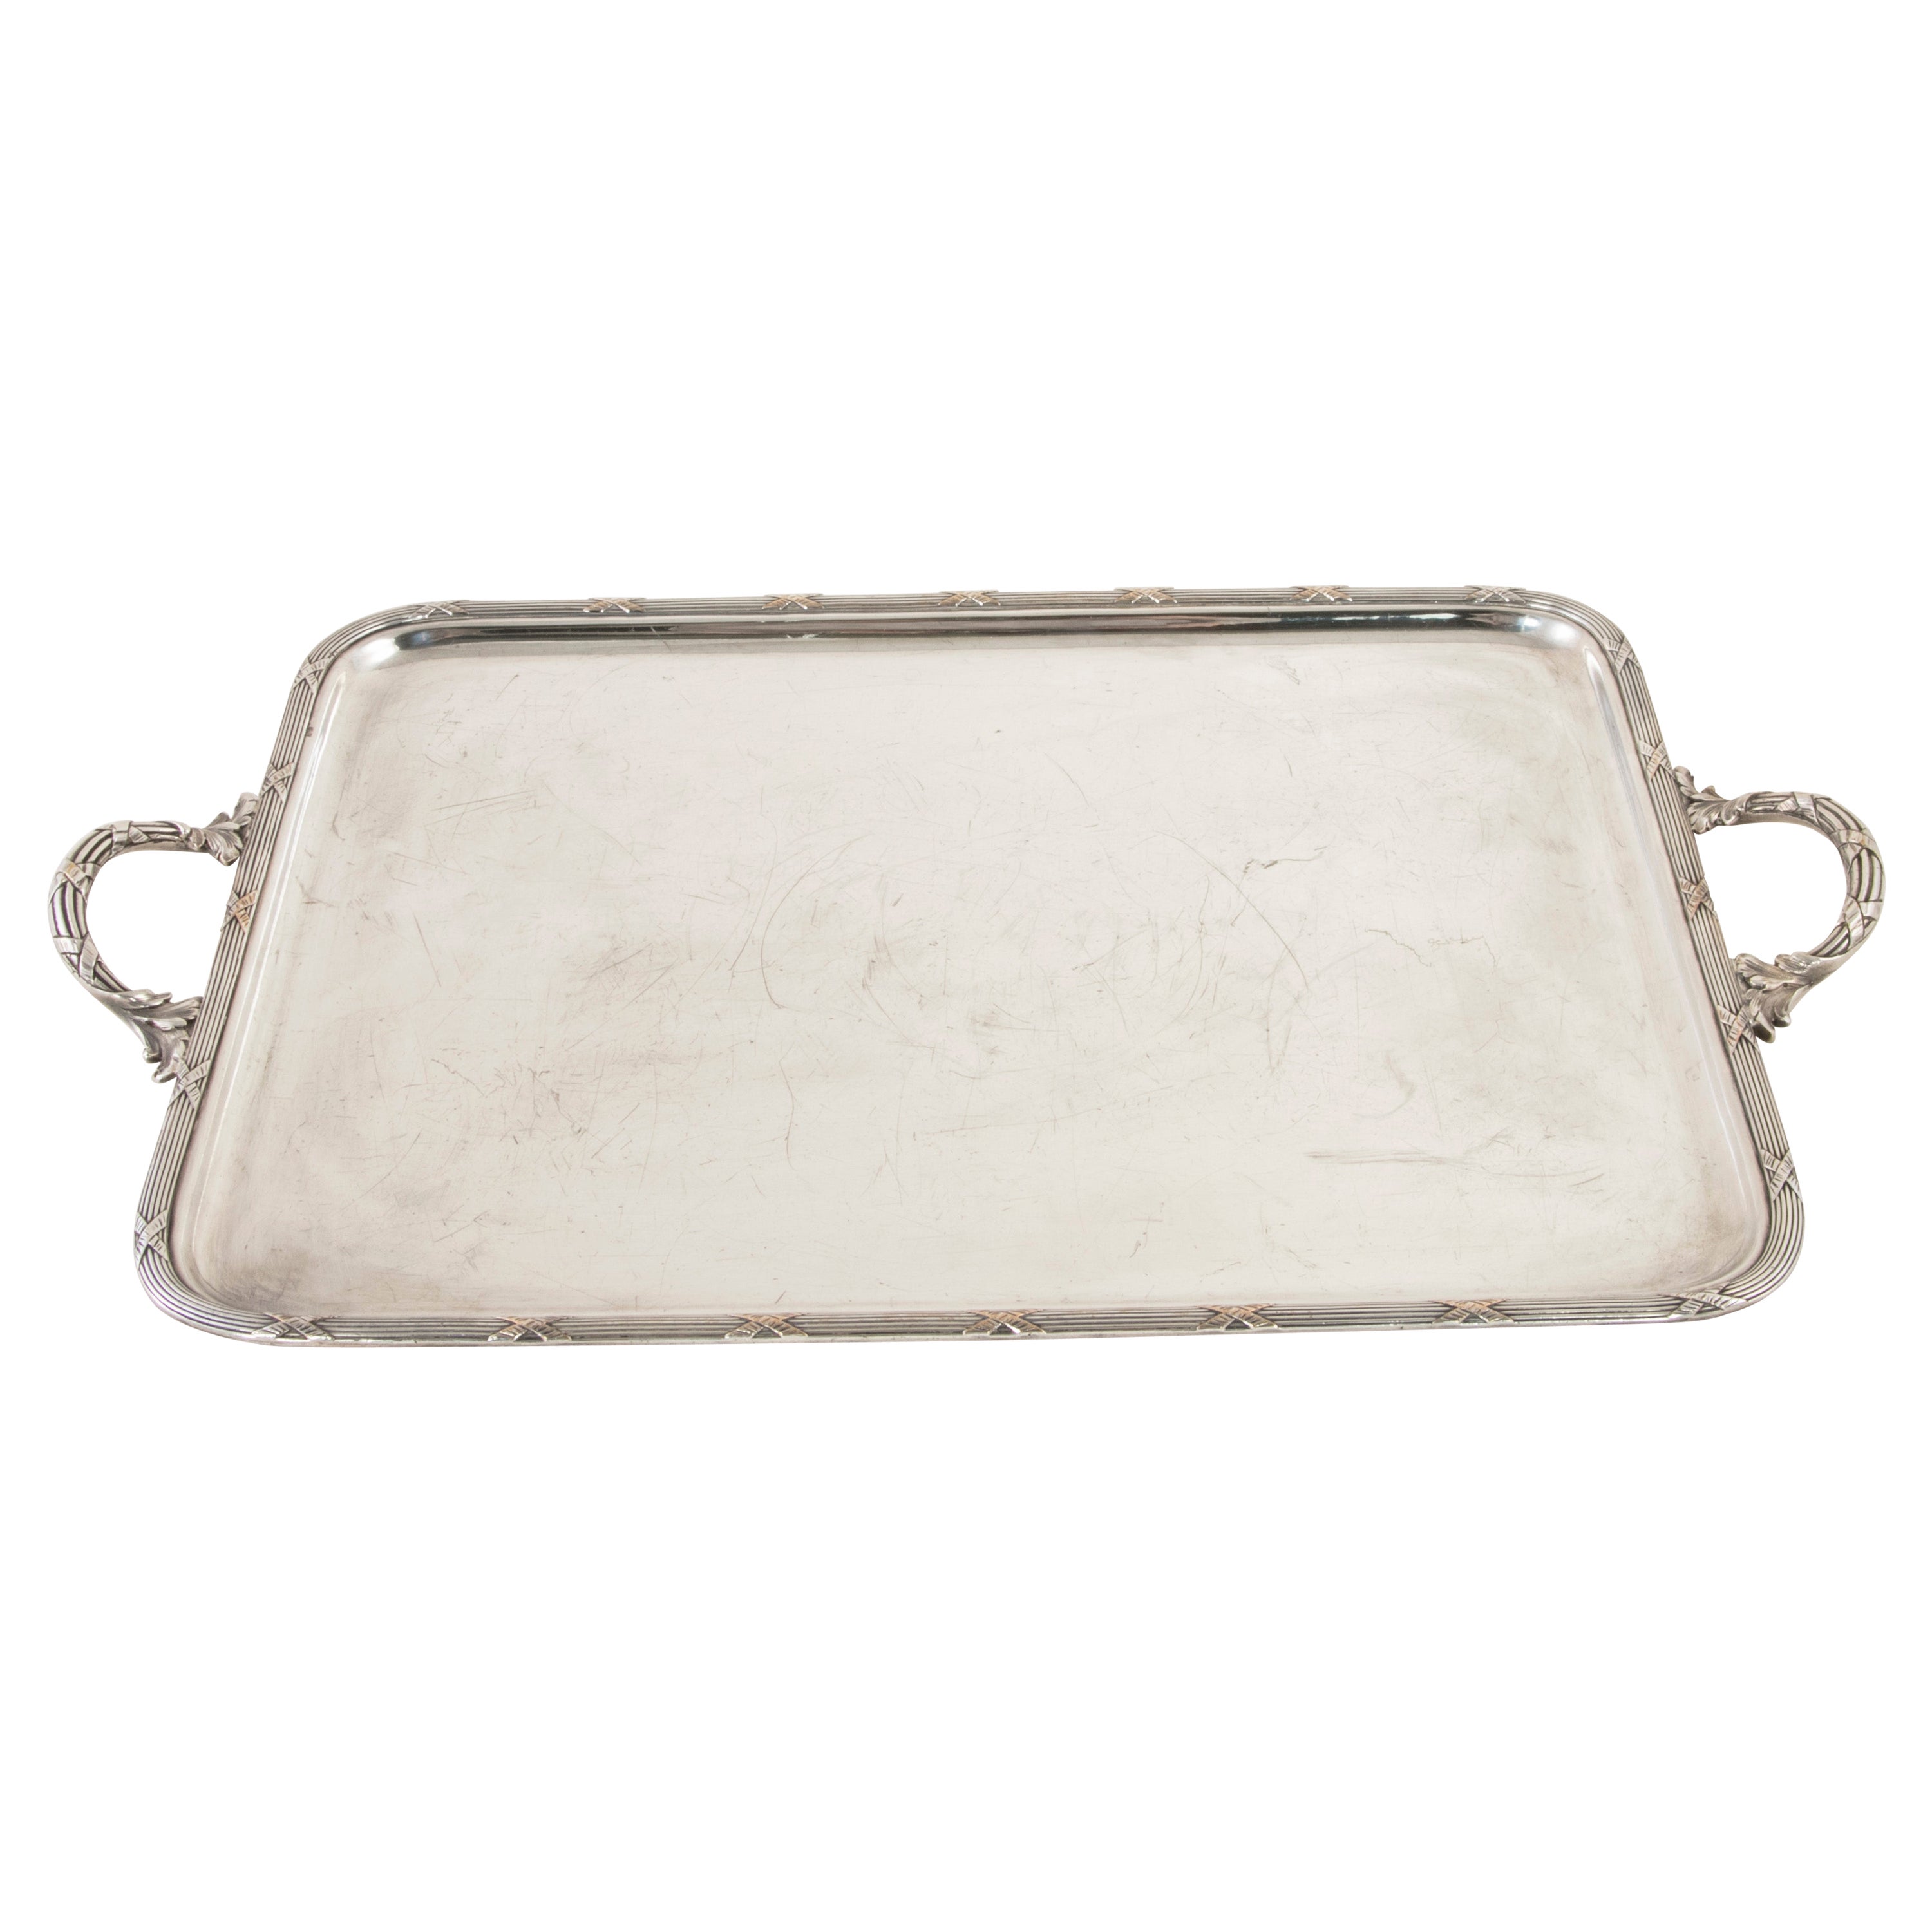 Late 19th Century French Louis XVI Style Silver Plate Serving Tray with Handles